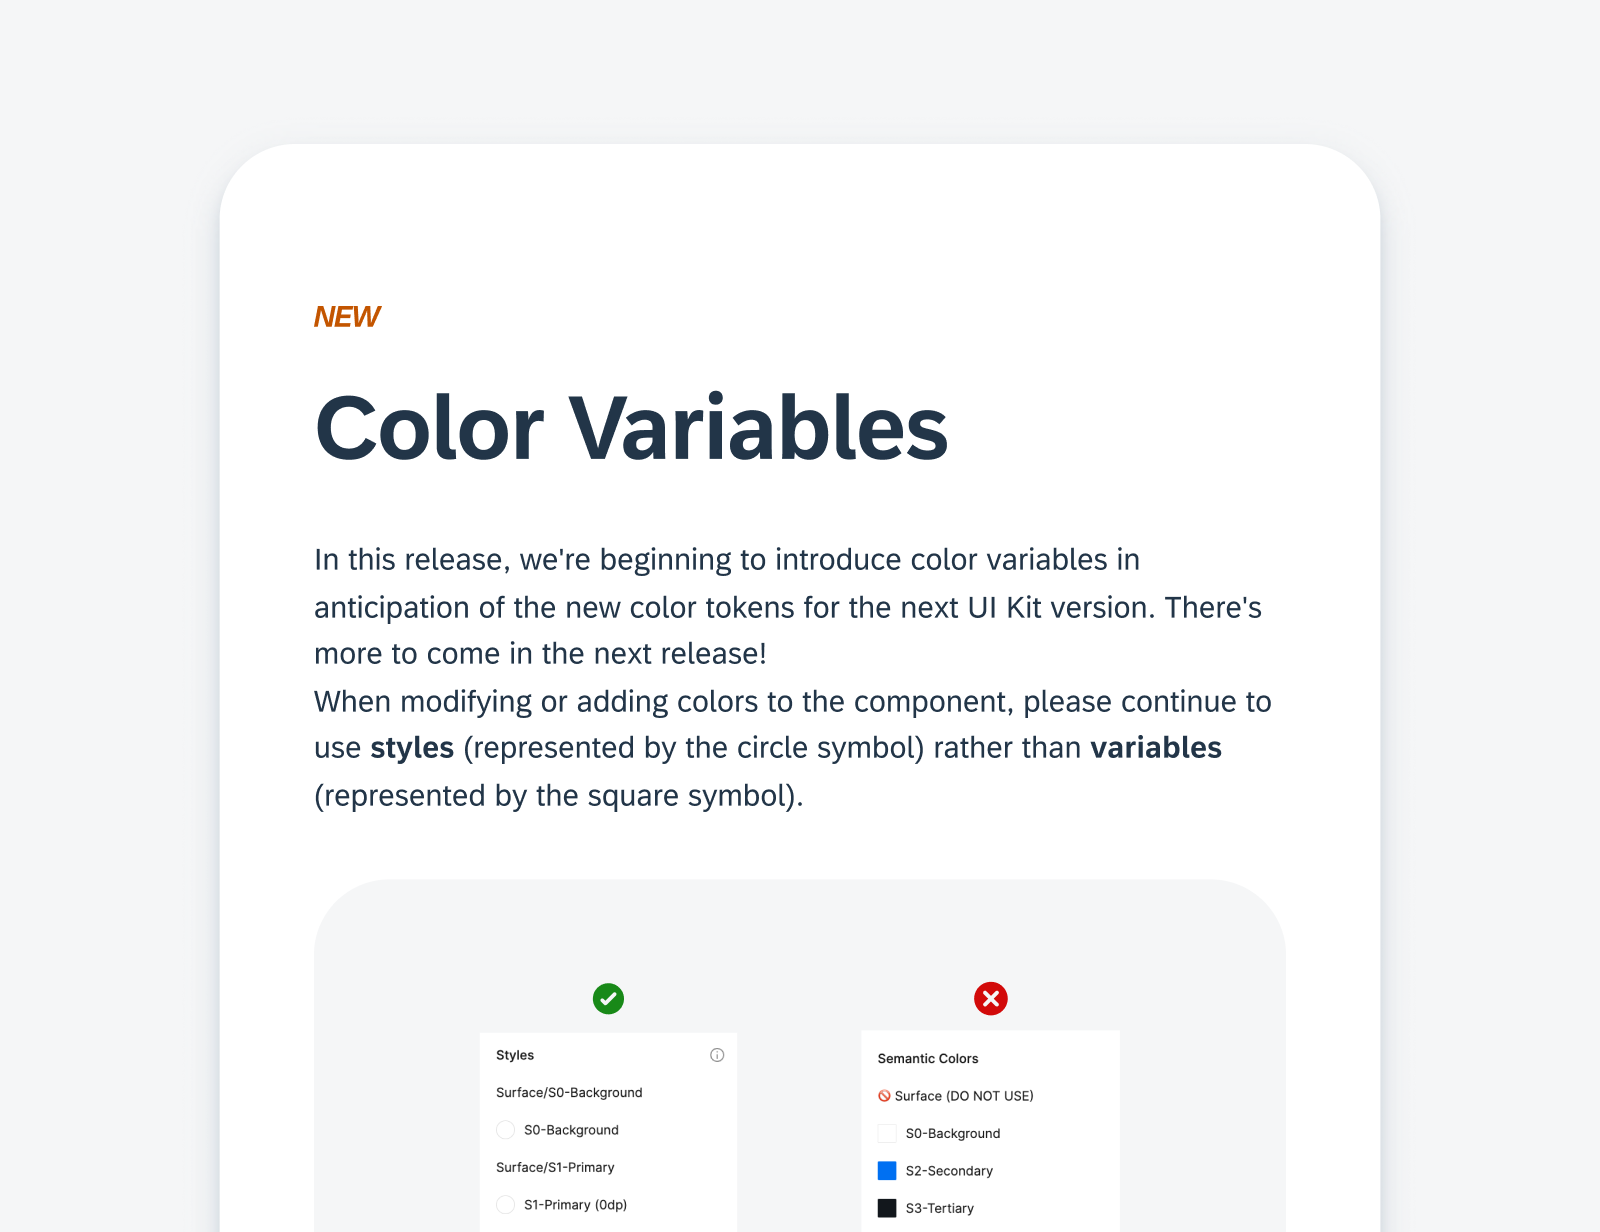 Introduce color variables in UI Kit